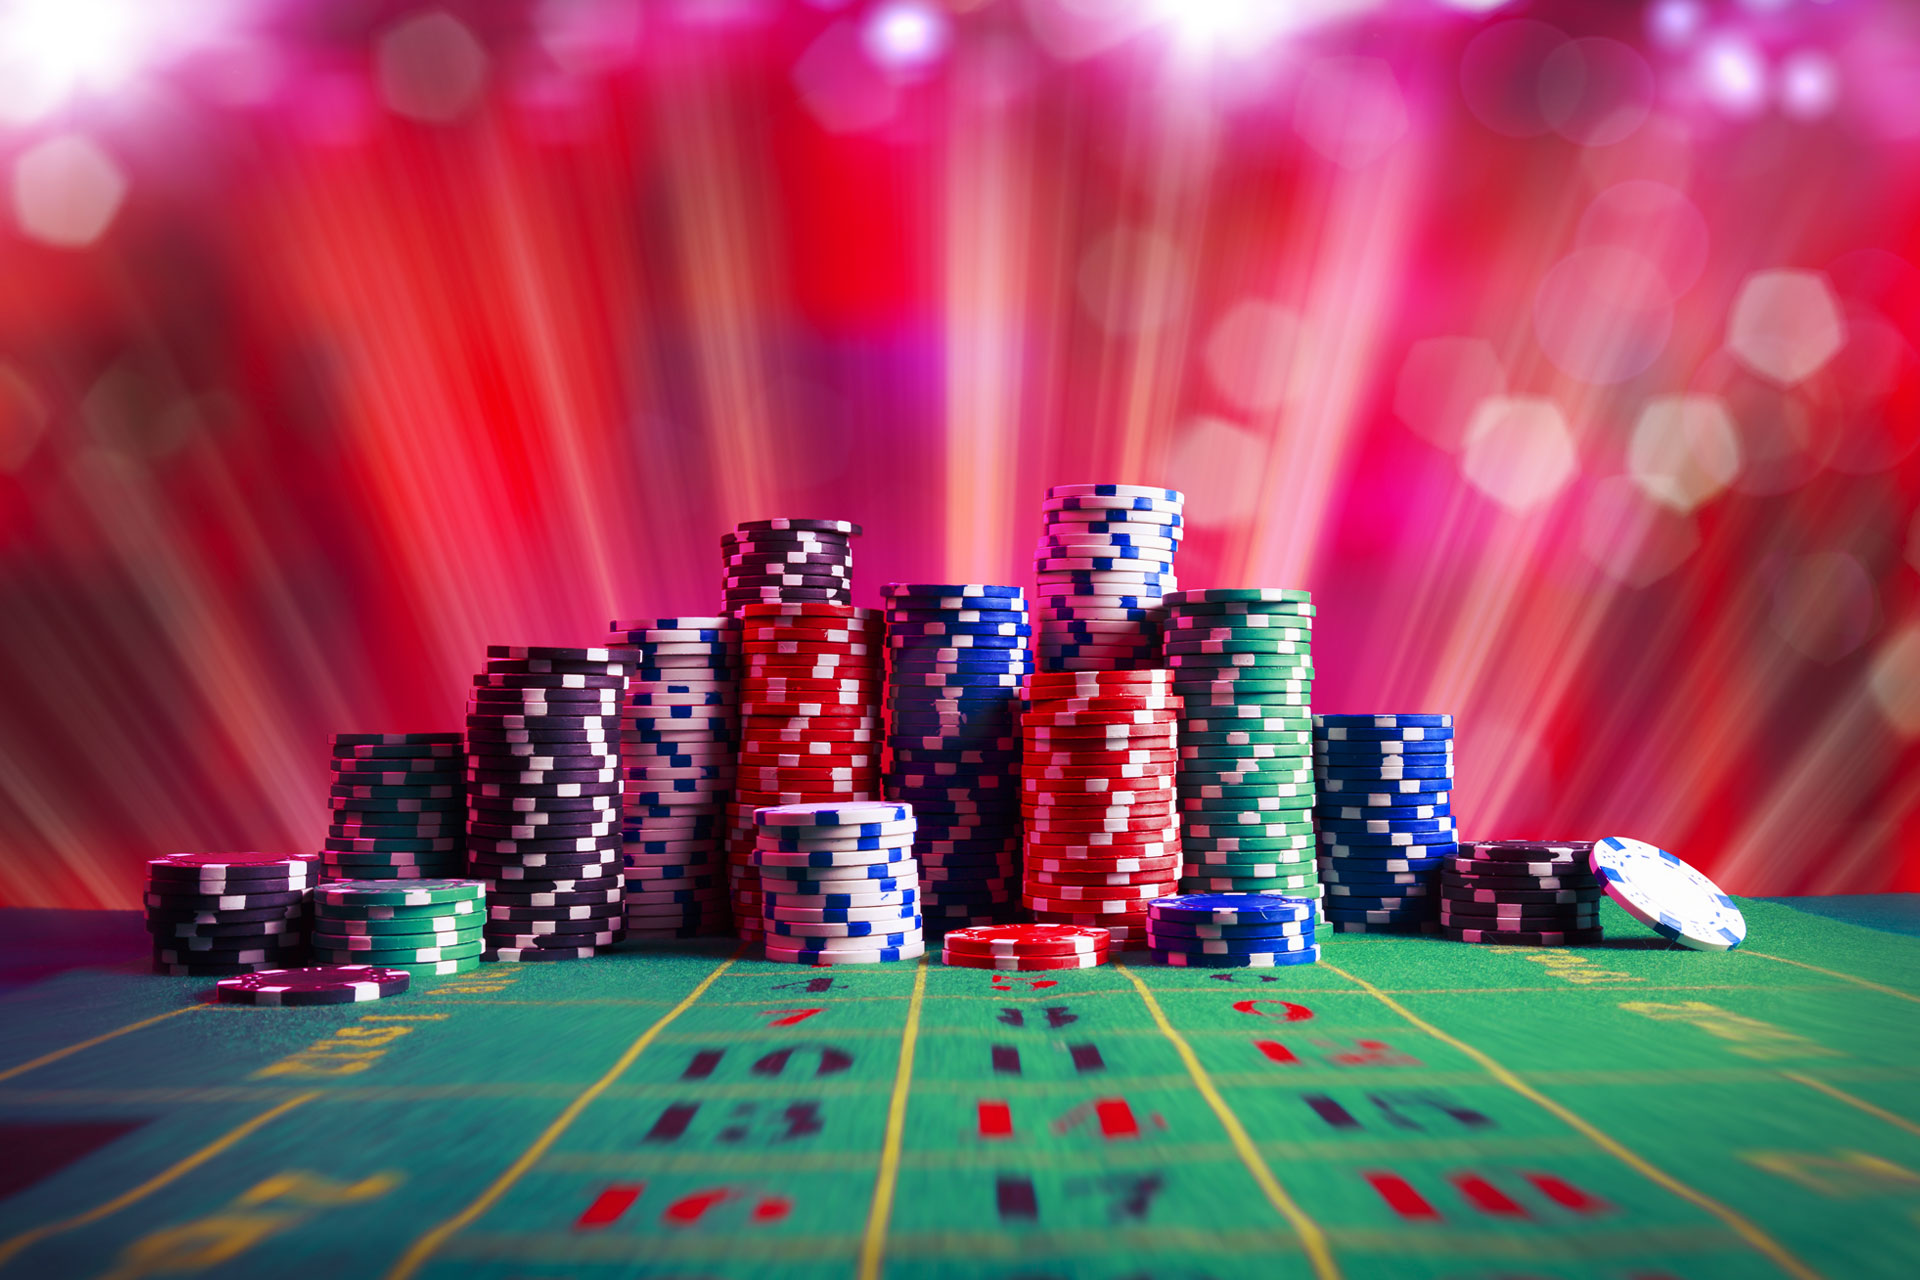 single player casino games for pc free download